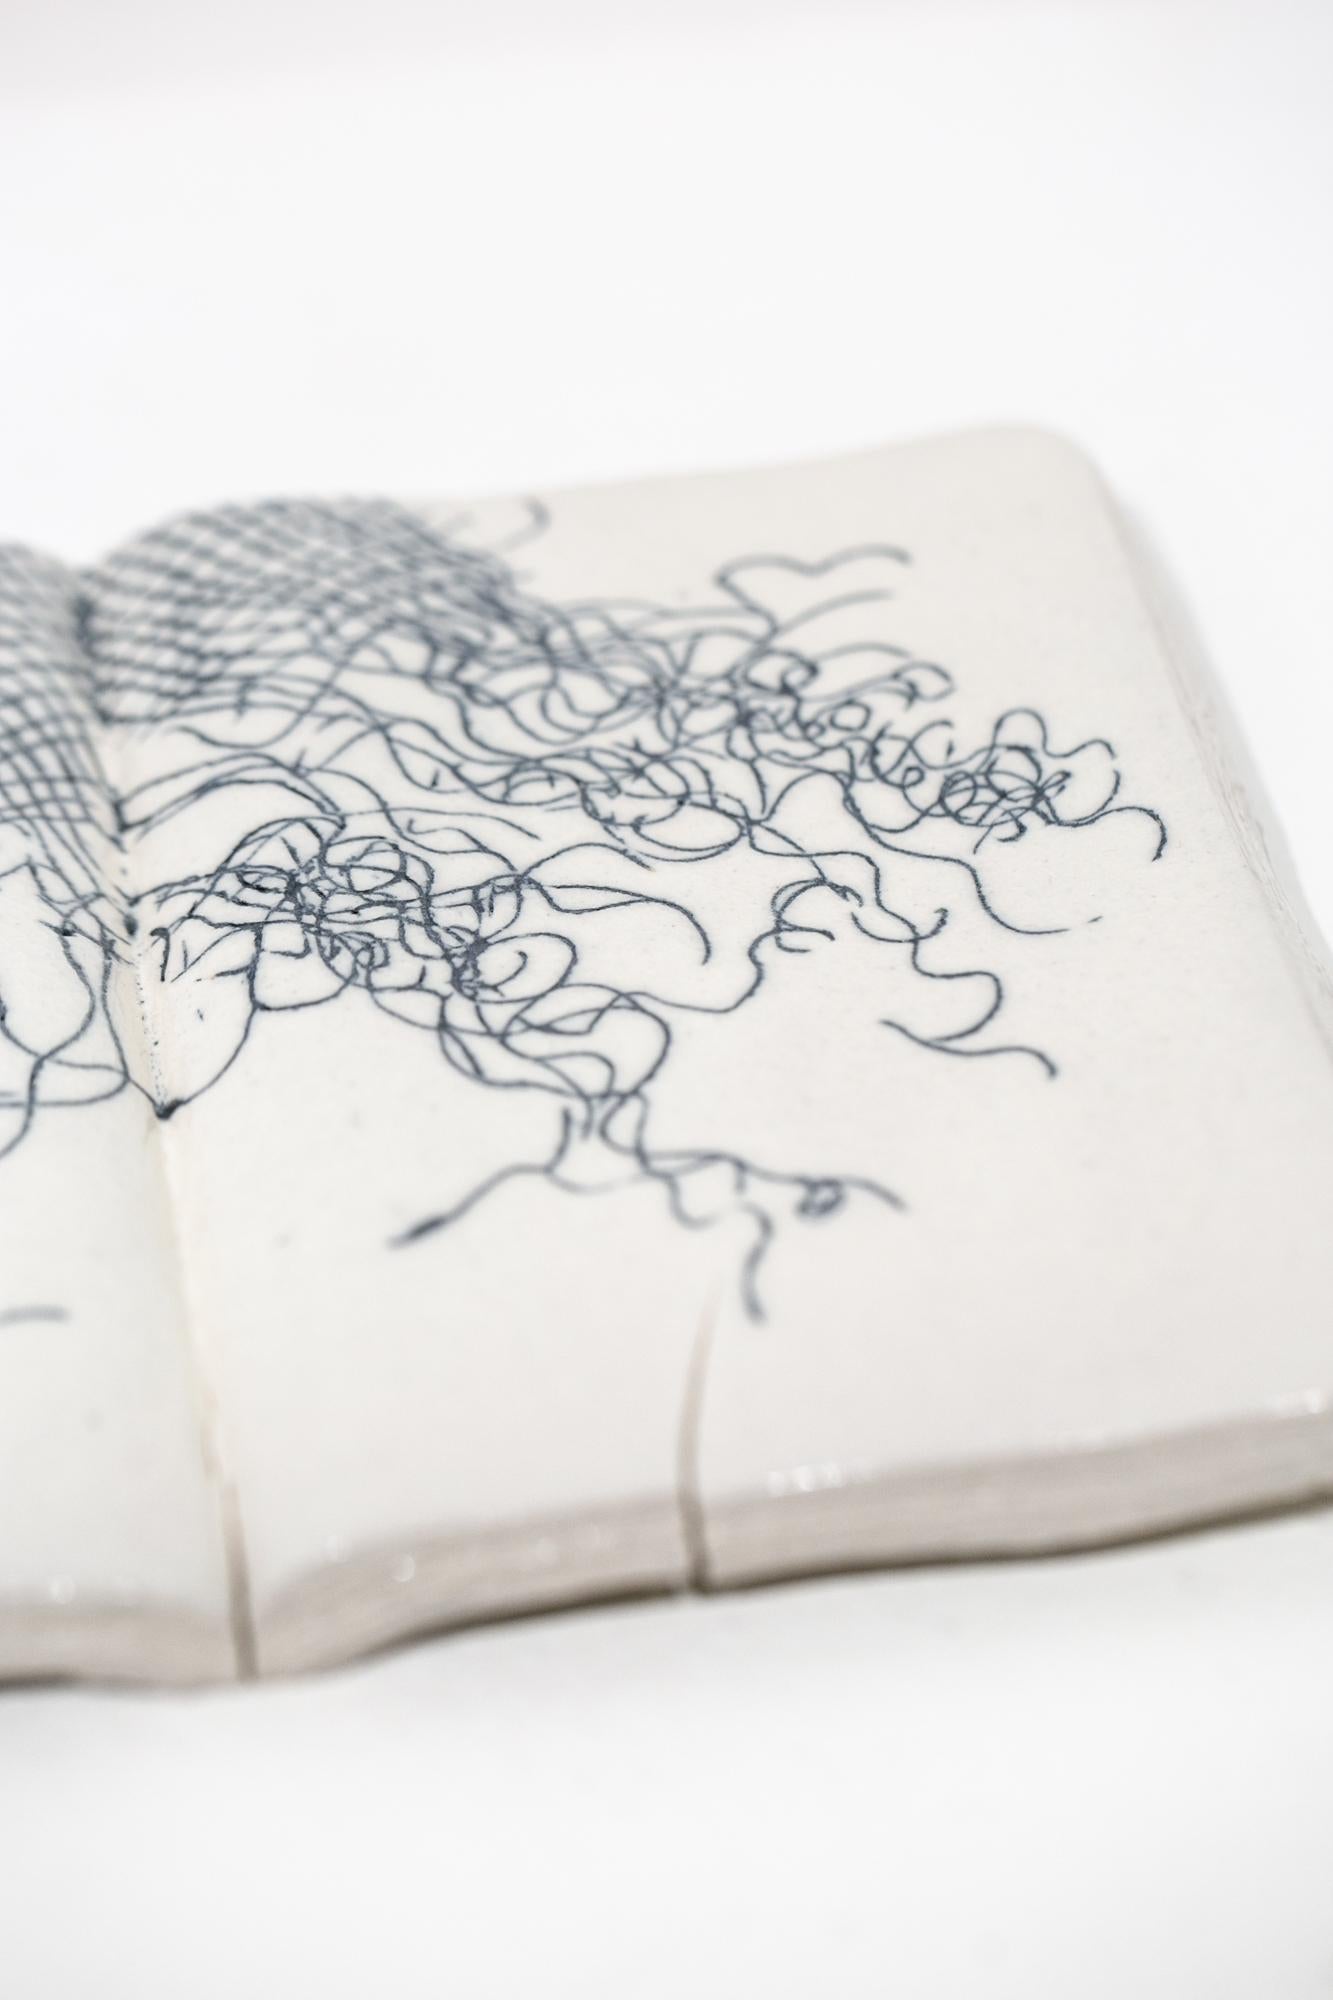 Sketchbook (small #4) - Gray Abstract Sculpture by Yoonmi Nam